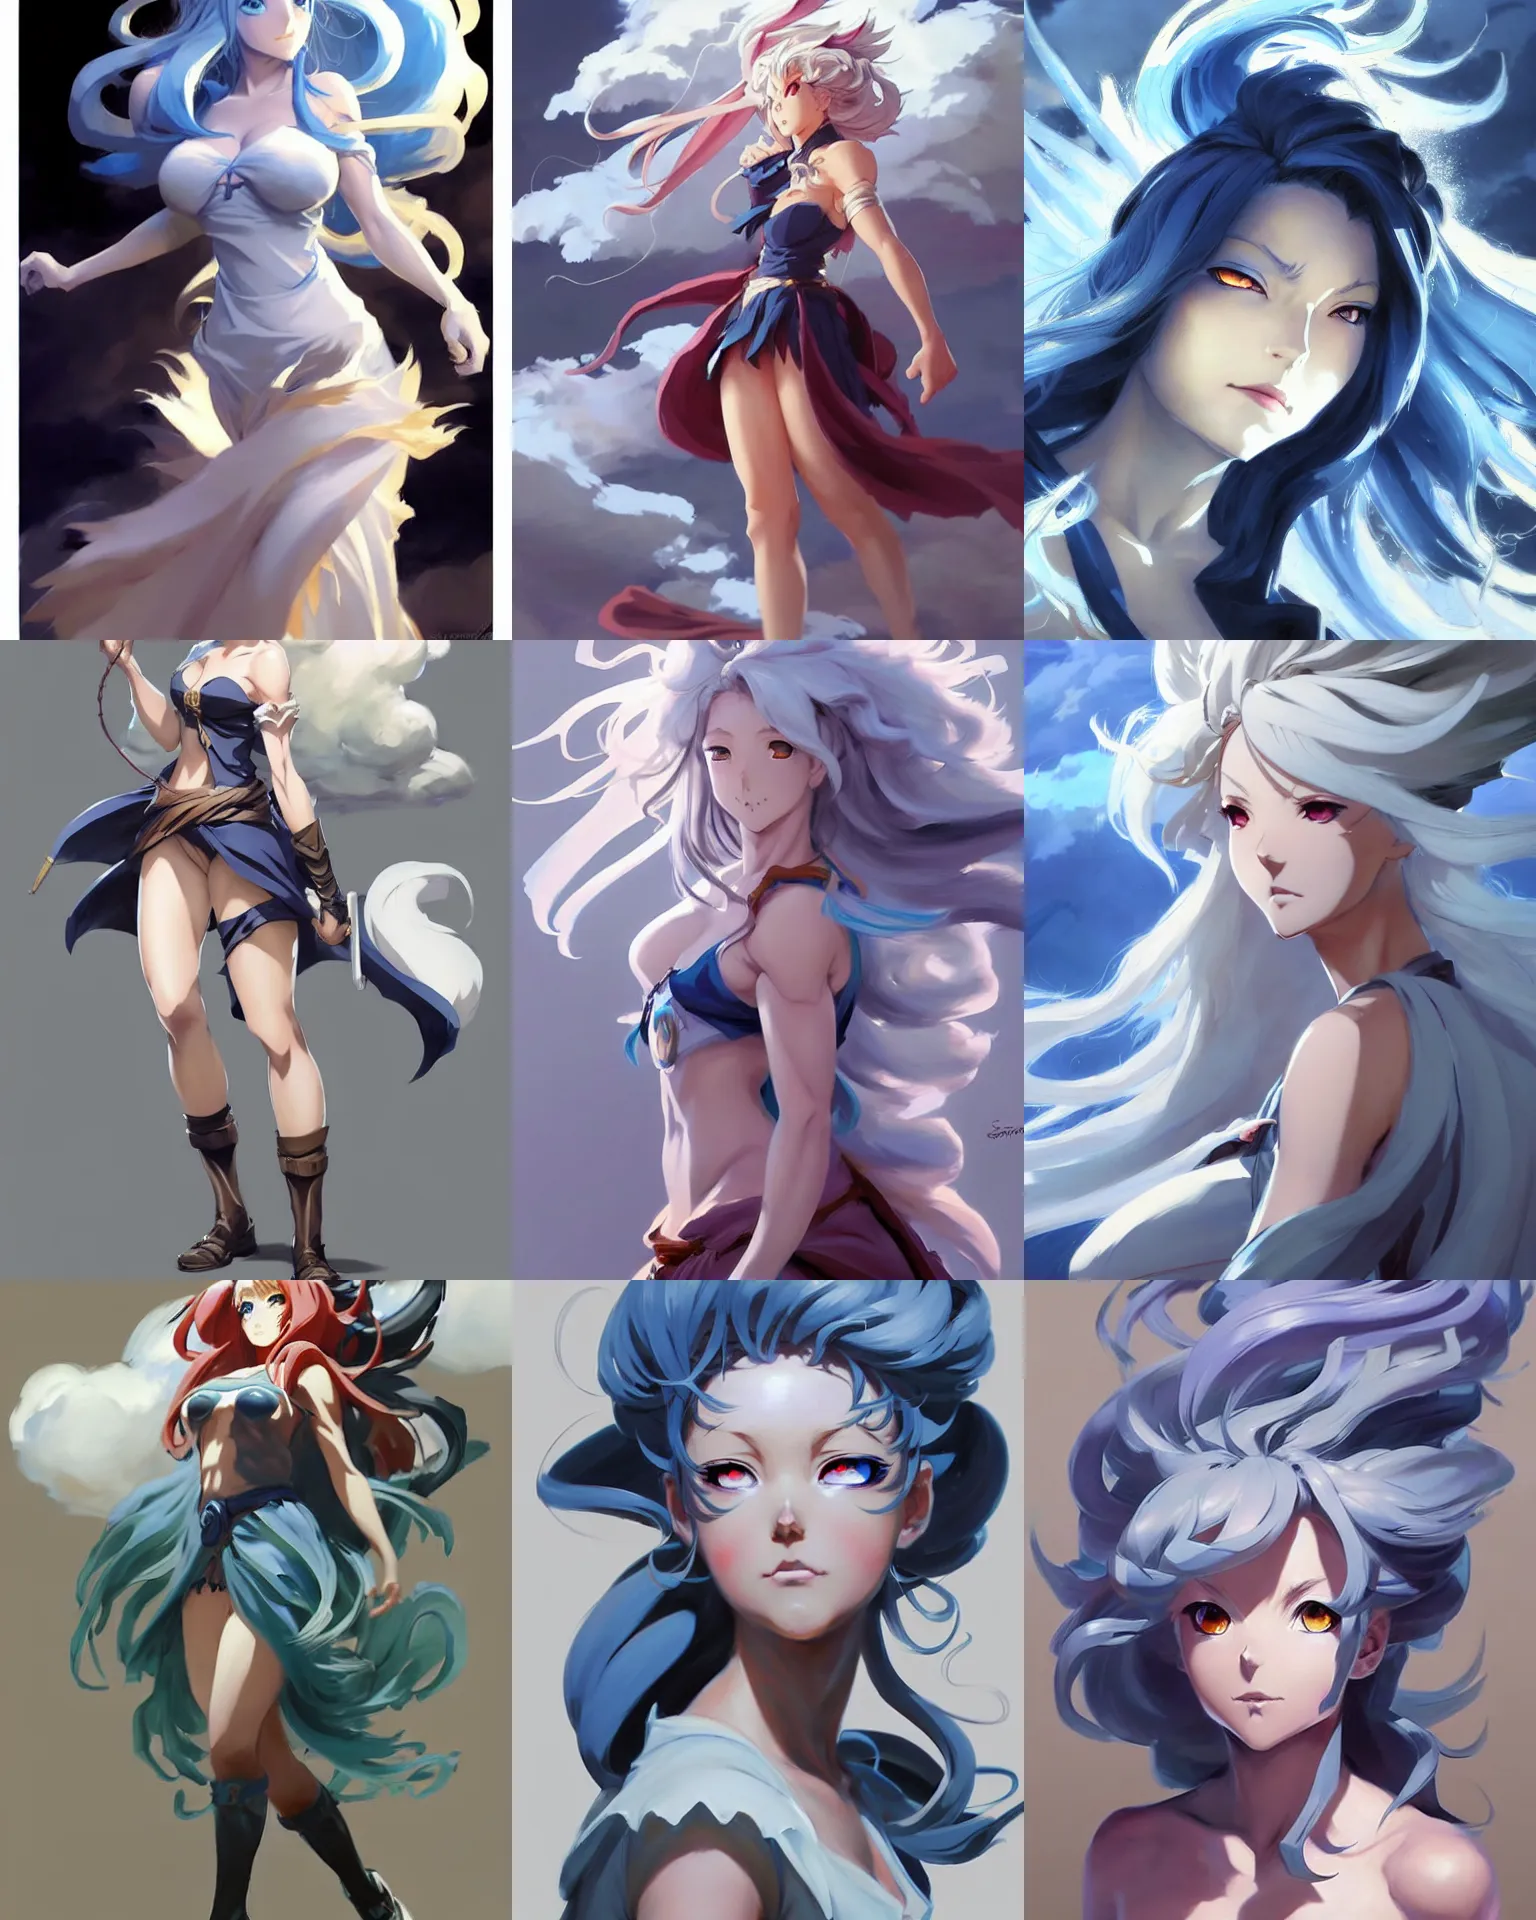 Prompt: greg manchess character concept art of an anime stormy cloud goddess | | anime anime anime anime anime anime, cute - fine - face, pretty face, realistic shaded perfect face, fine details by stanley artgerm lau, wlop, rossdraws, james jean, andrei riabovitchev, marc simonetti, and sakimichan, trending on artstation